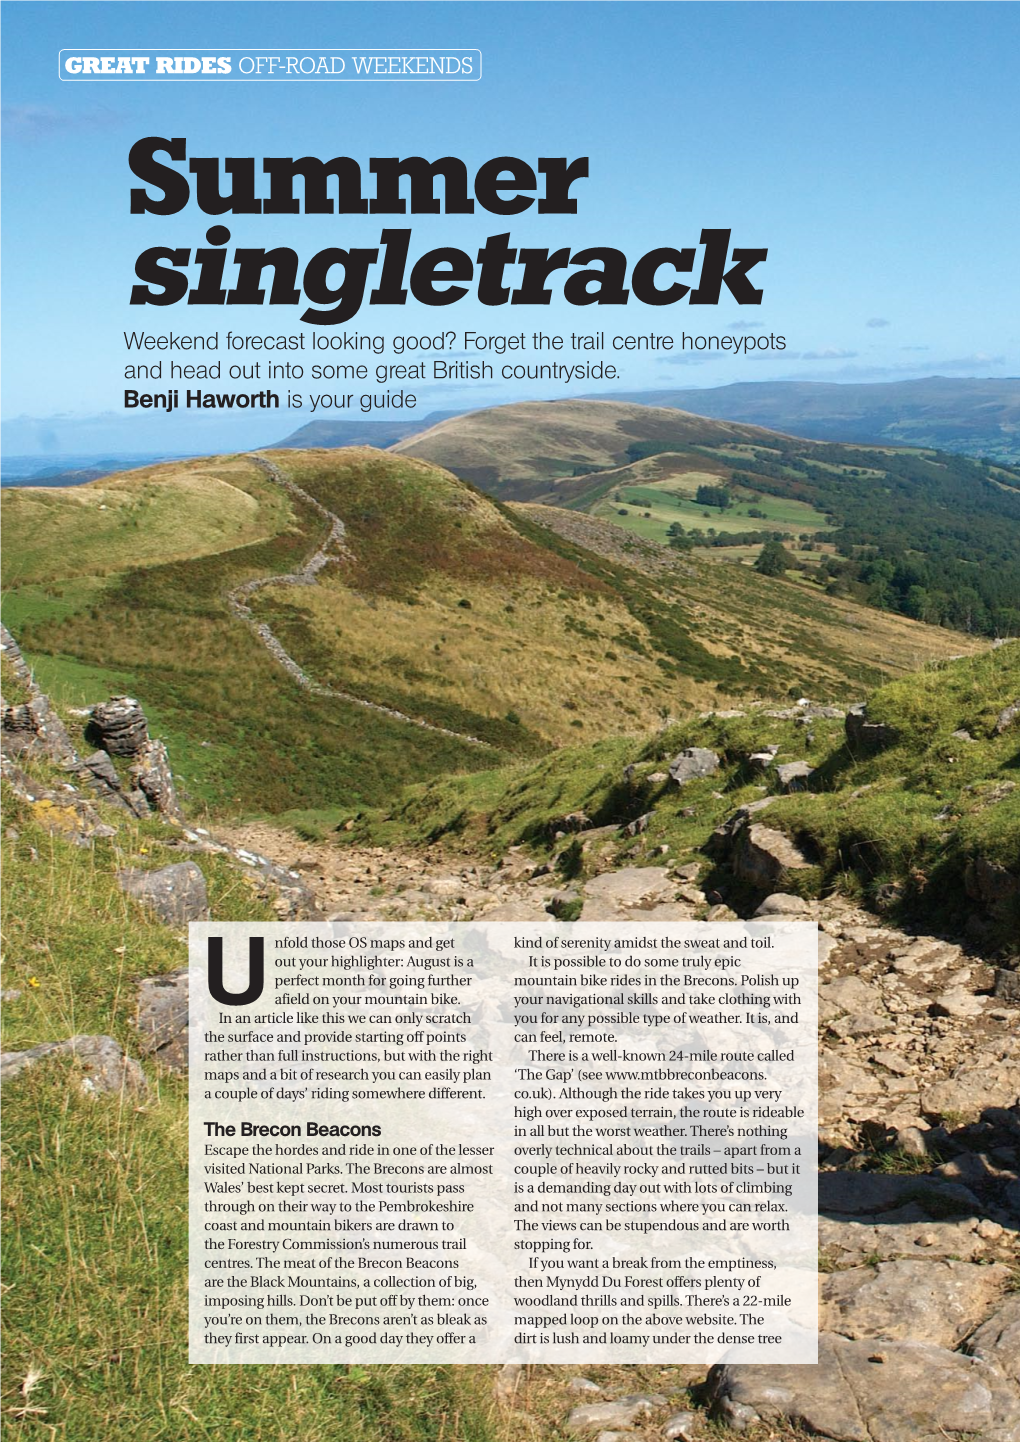 Summer Singletrack Weekend Forecast Looking Good? Forget the Trail Centre Honeypots and Head out Into Some Great British Countryside